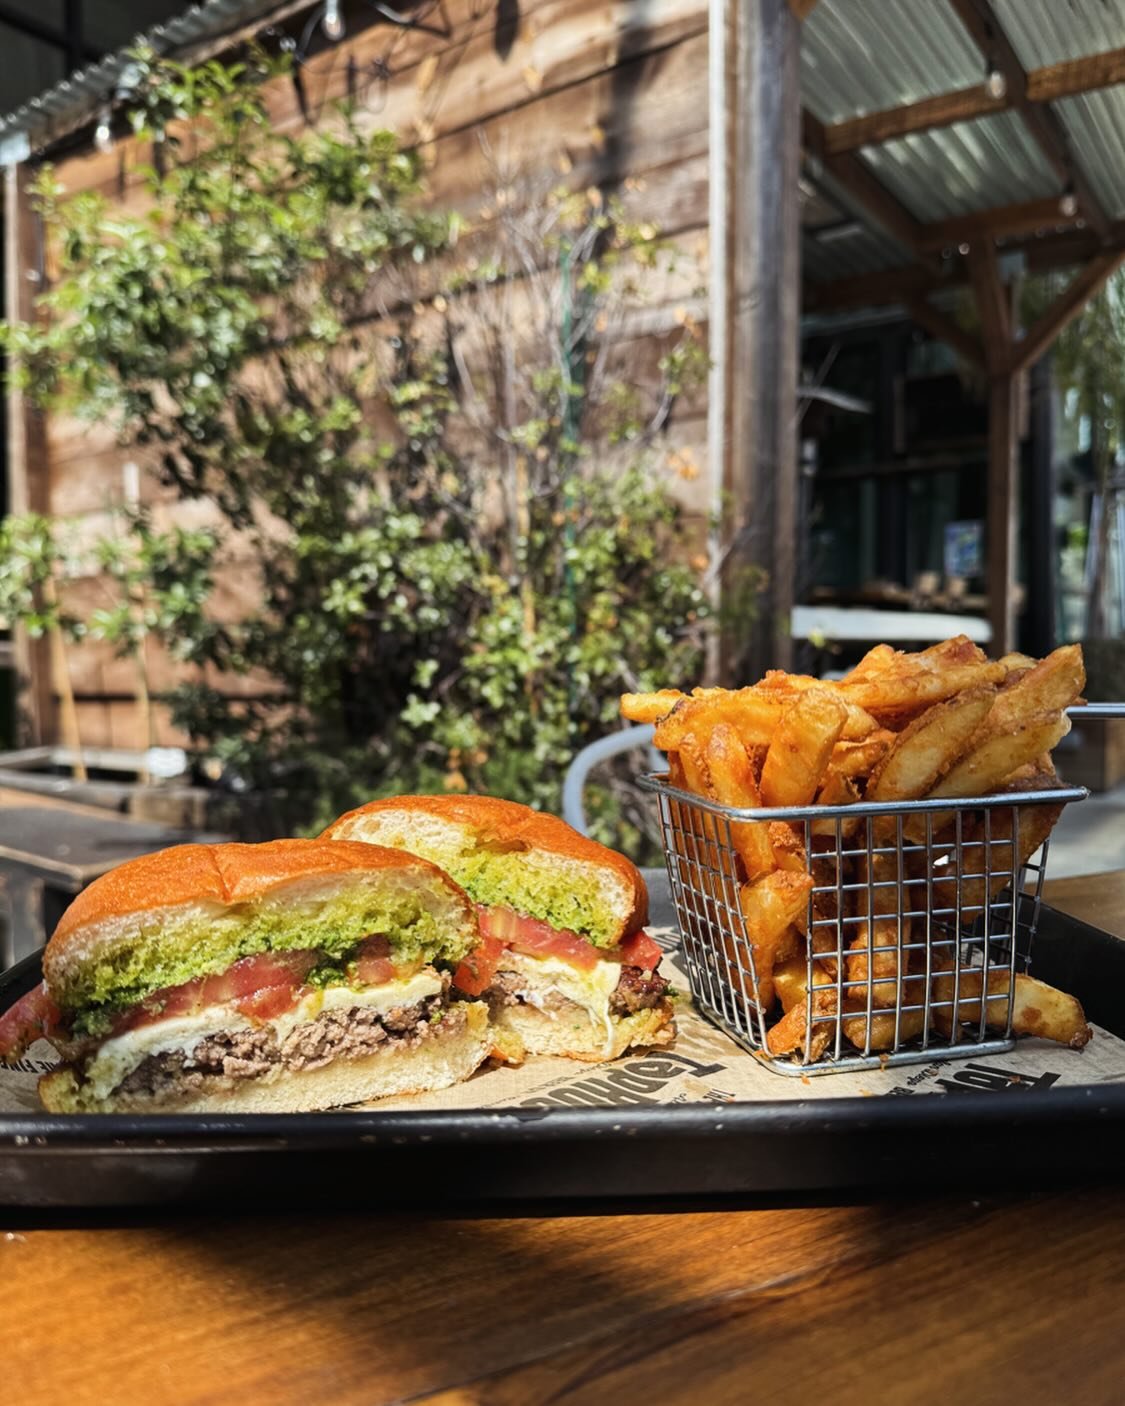 🍔 MAY BURG OF DA MONTH 🍔

Our BOTM is here! Introducing the CAPRESE BURGER! 

Featuring a juicy burger patty stacked with fresh mozzarella, EVOO &amp; balsamic-marinated crisp tomatoes, and housemade pesto with a toasty, buttery brioche bun. Perfec